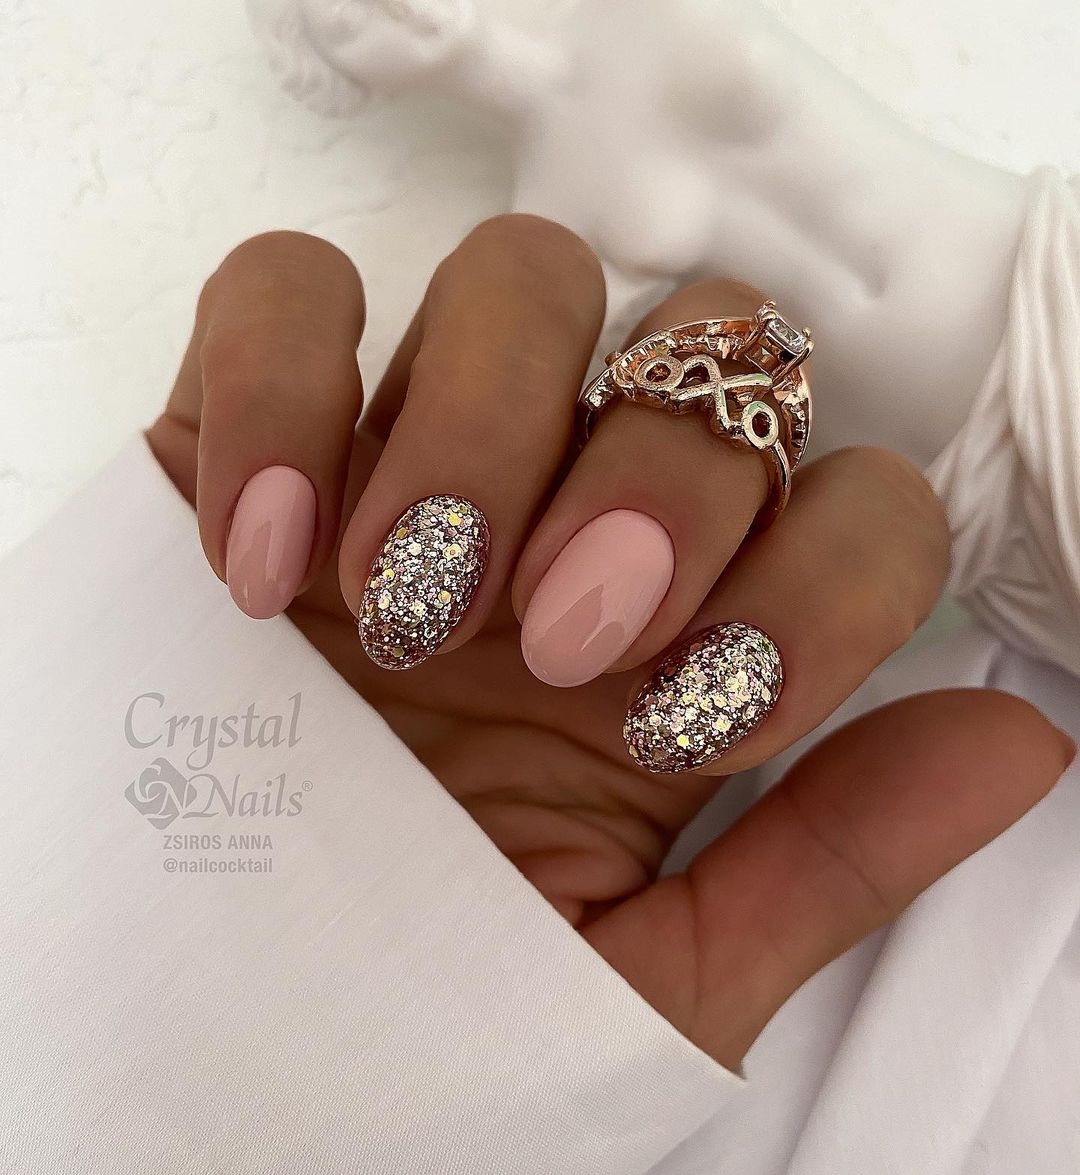 Short Round Nude Nails with Silver Glitter Design